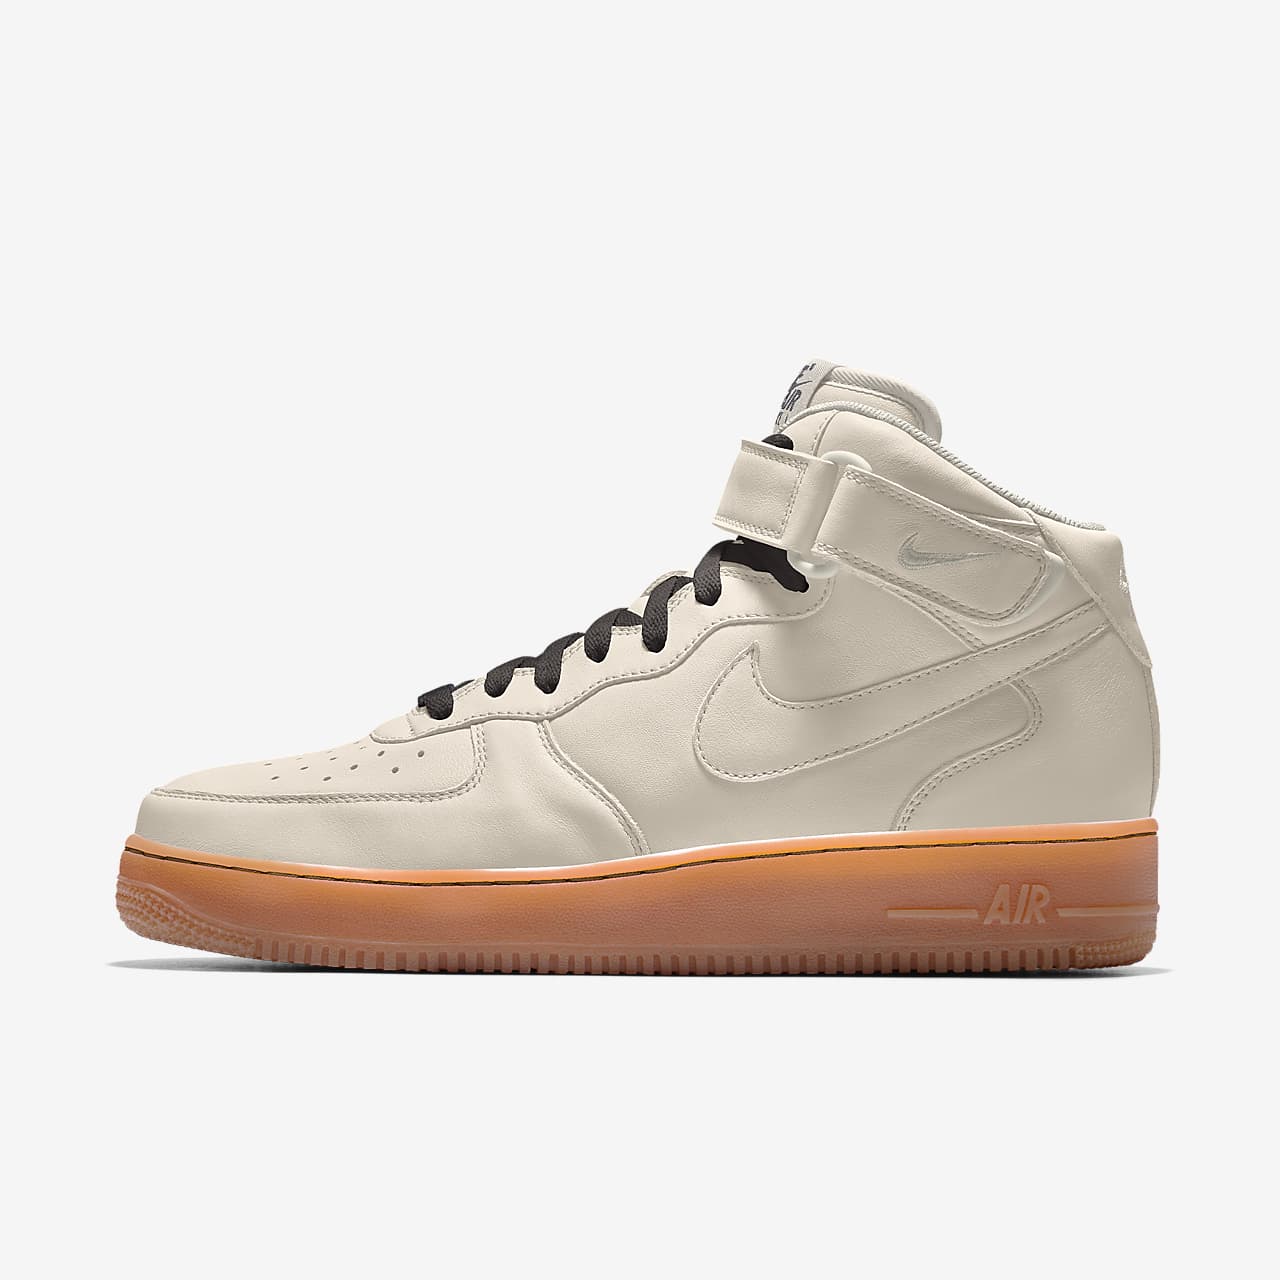 Chaussure personnalisable Nike Air Force 1 Mid By You pour Homme